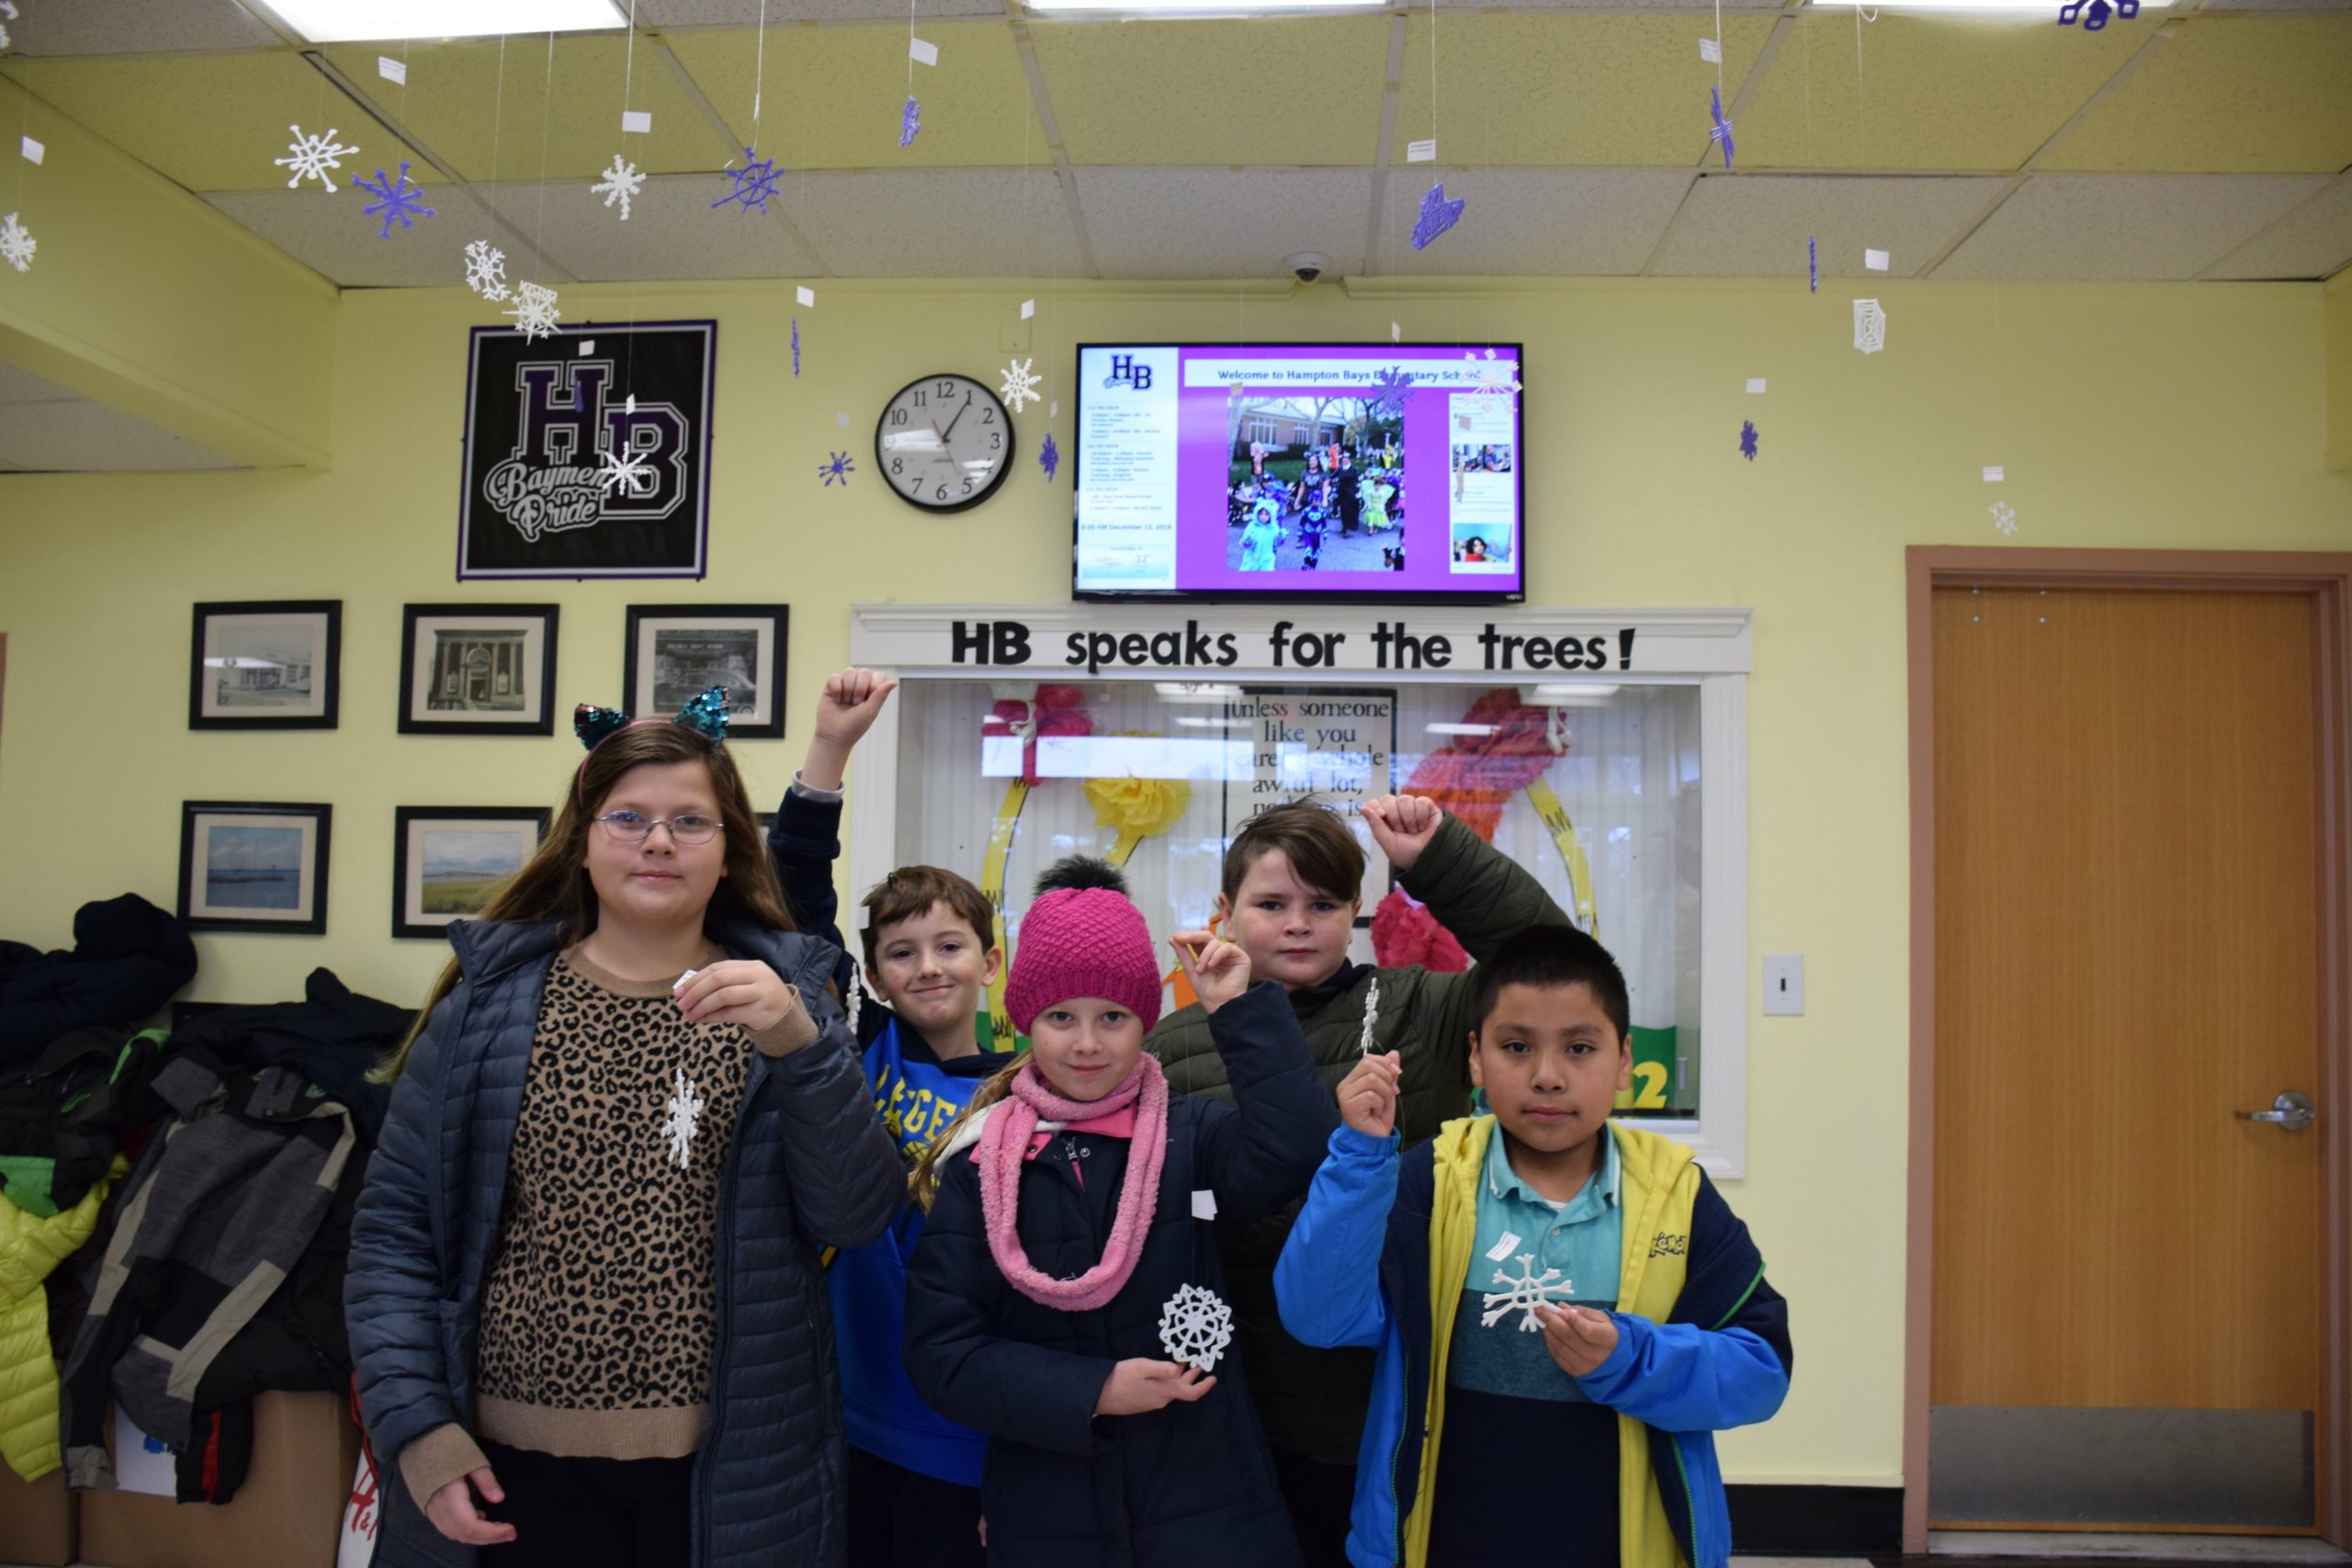 Hampton Bays Elementary School fourth-graders used 3D printing technology in their STEM classes to design symmetrical snowflakes. The 152 individually designed works of art are displayed in the main hallway of the school.